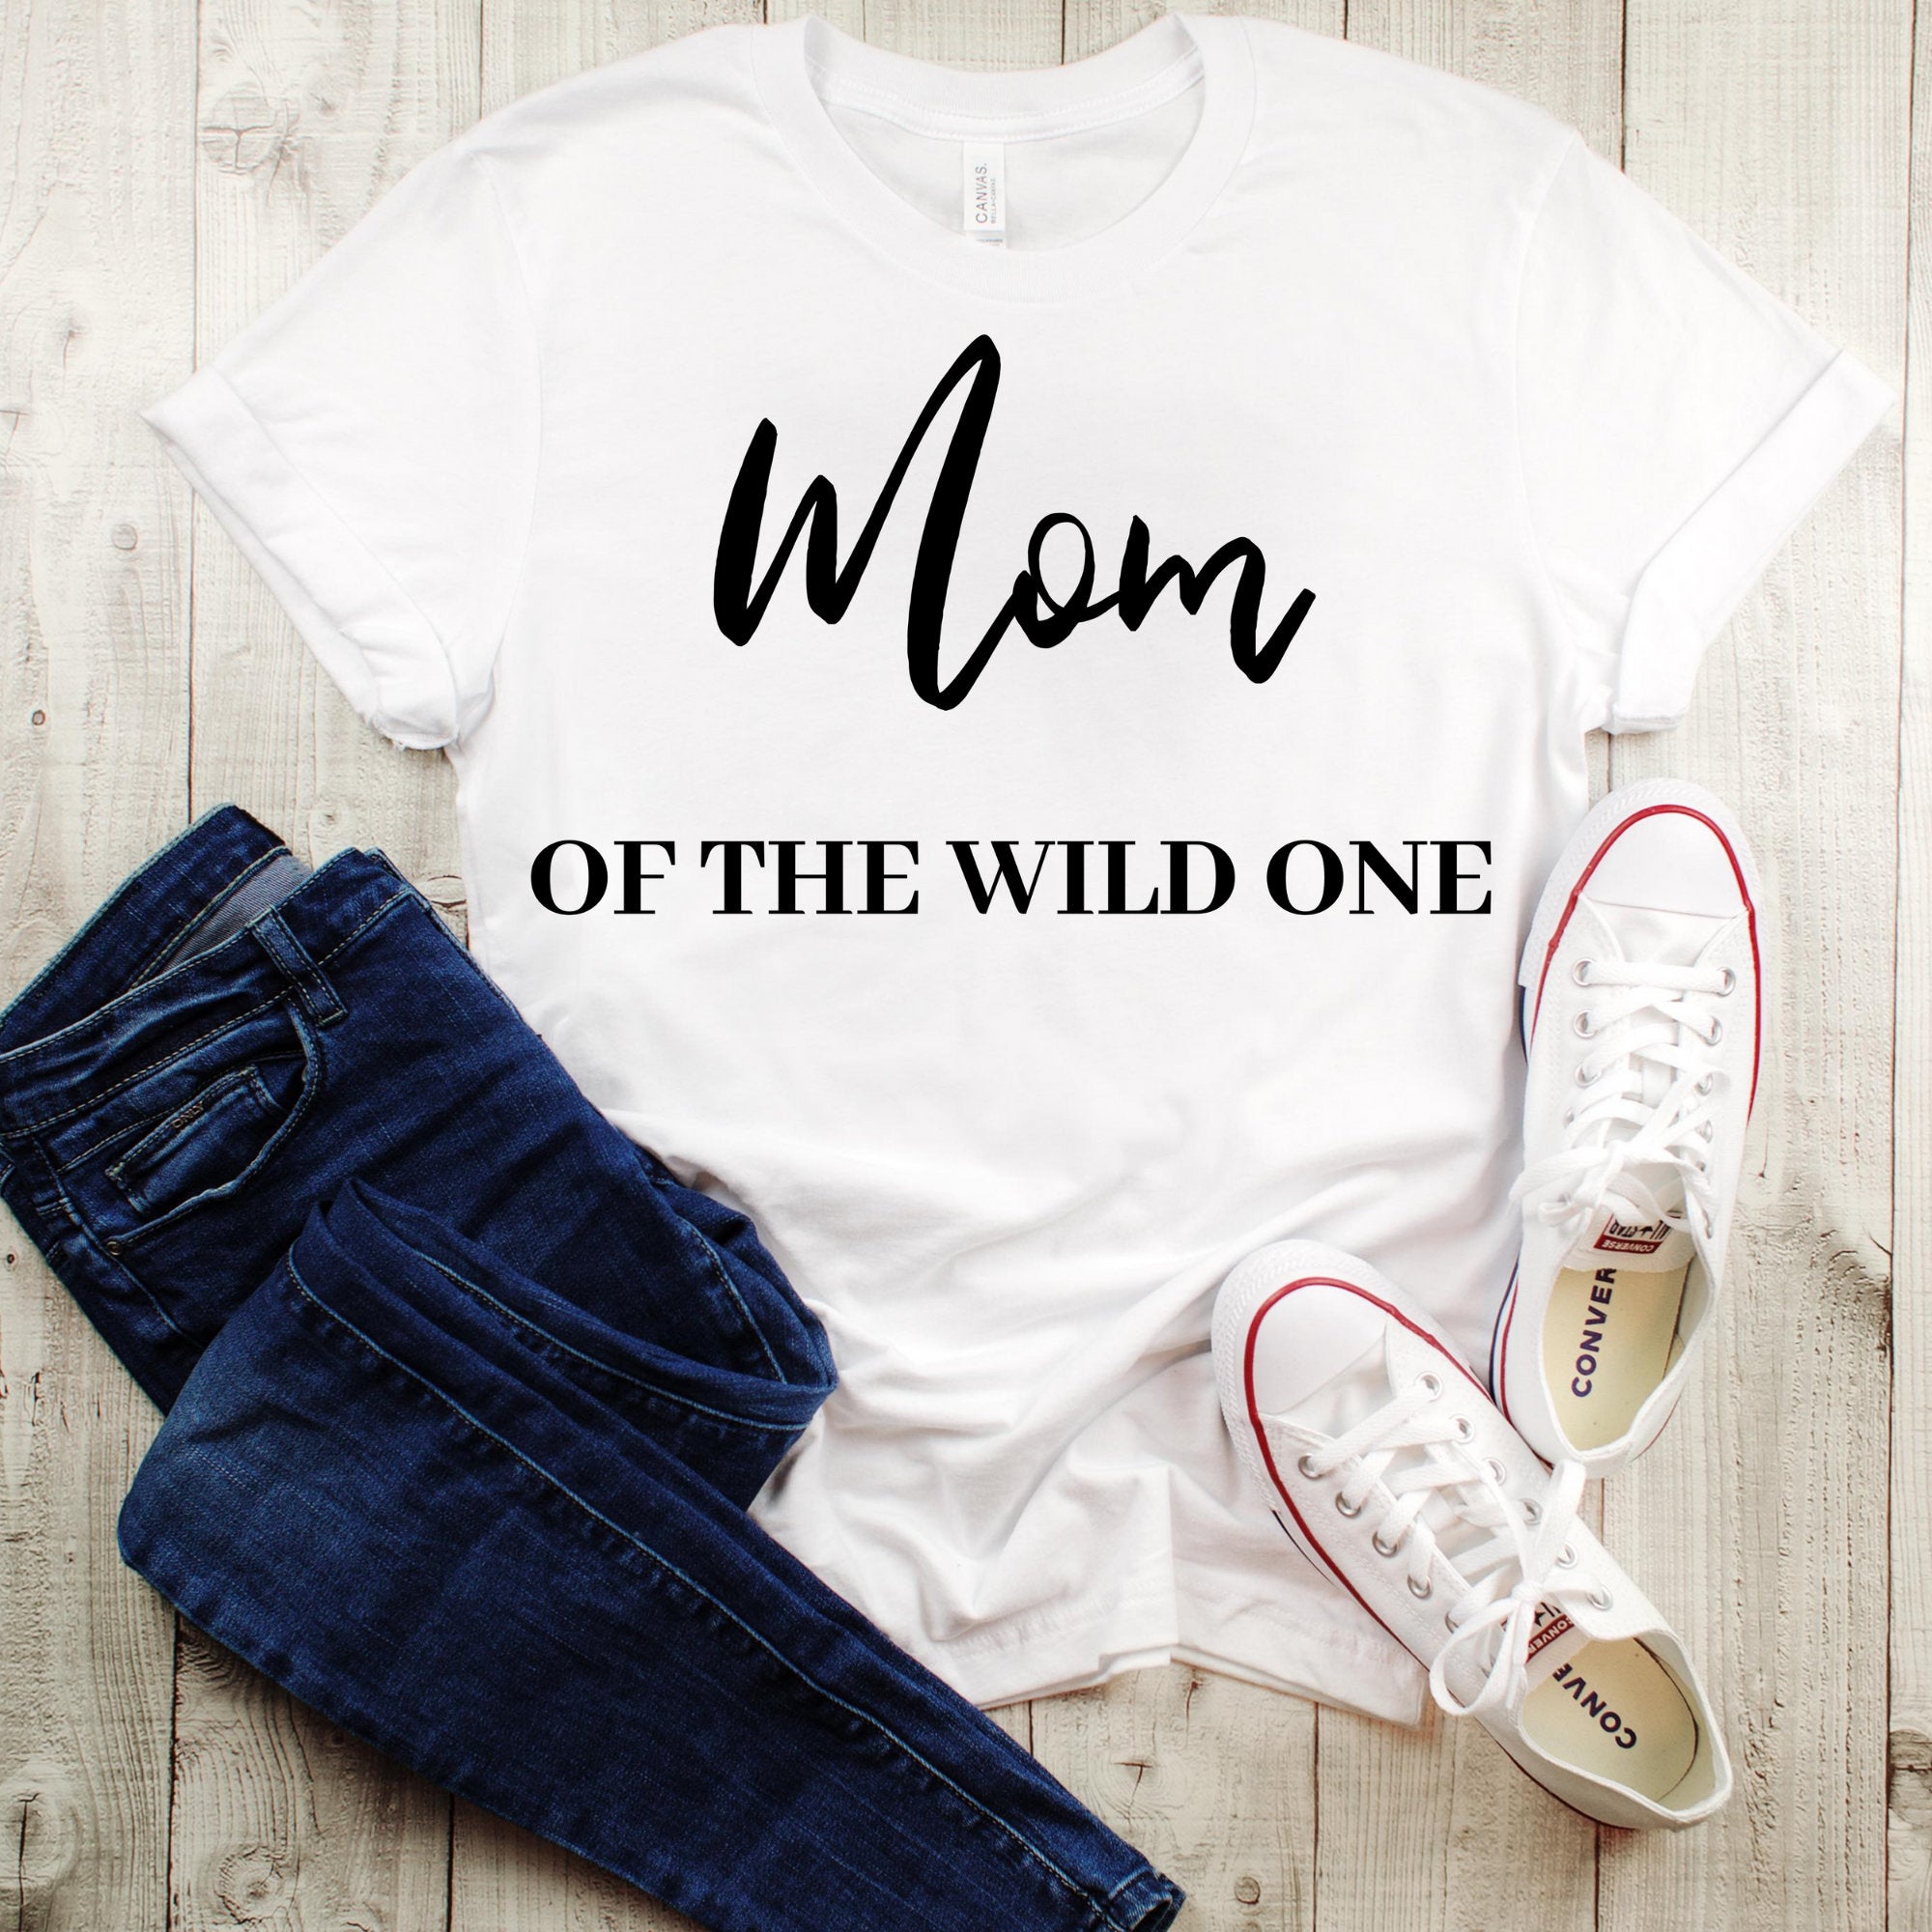 The Wild One-Mom of the Wild One, Mom and Baby Matching Shirts,Funny Matching Outfits, Mom Gift Ideas, Matching Shirts for Moms,Mommy and Me - MamaBuzz Creations